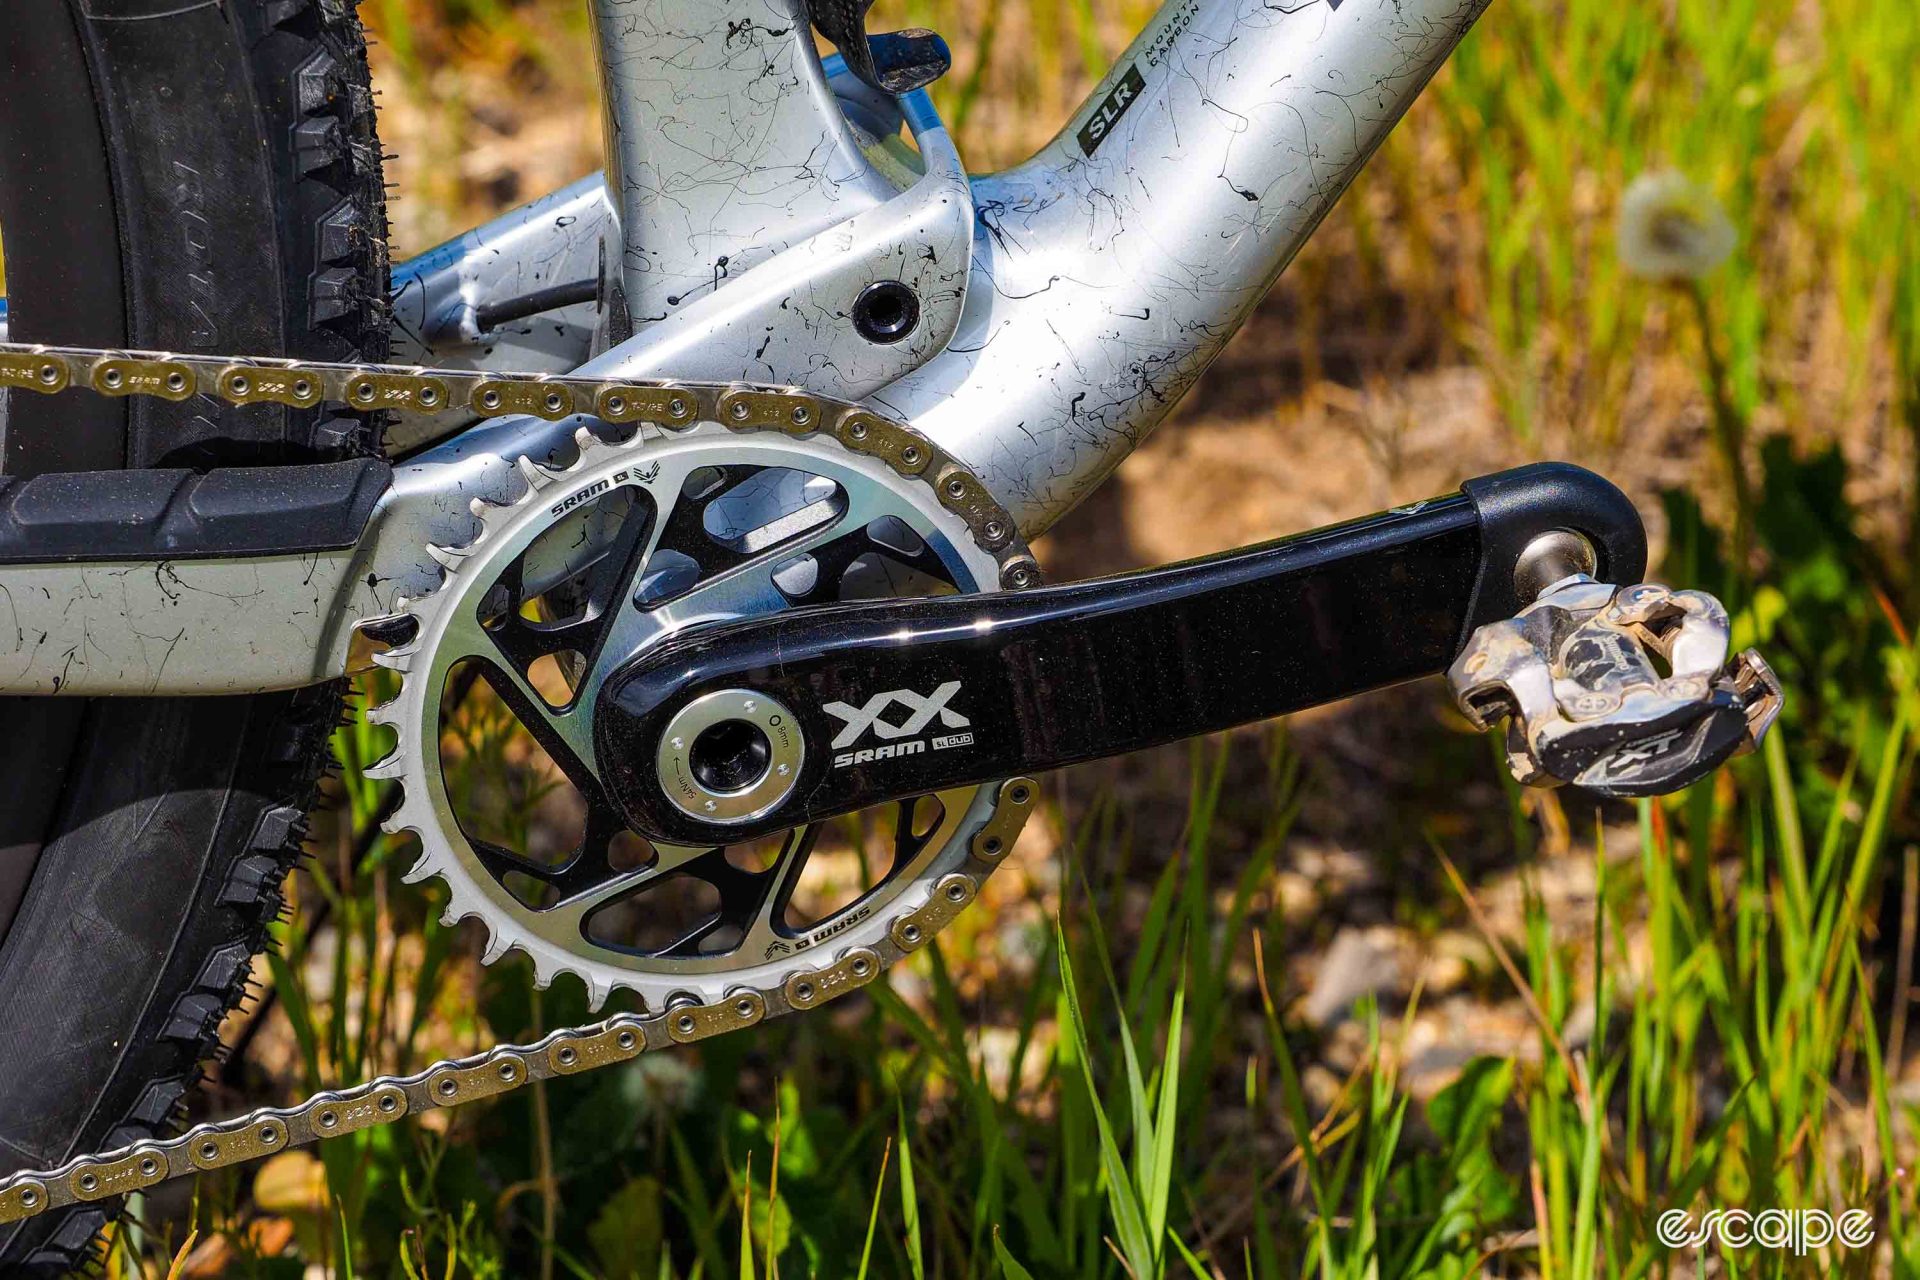 The crankset on the Supercaliber features a larger, 34T chainring, a size that works well with the suspension pivot location.